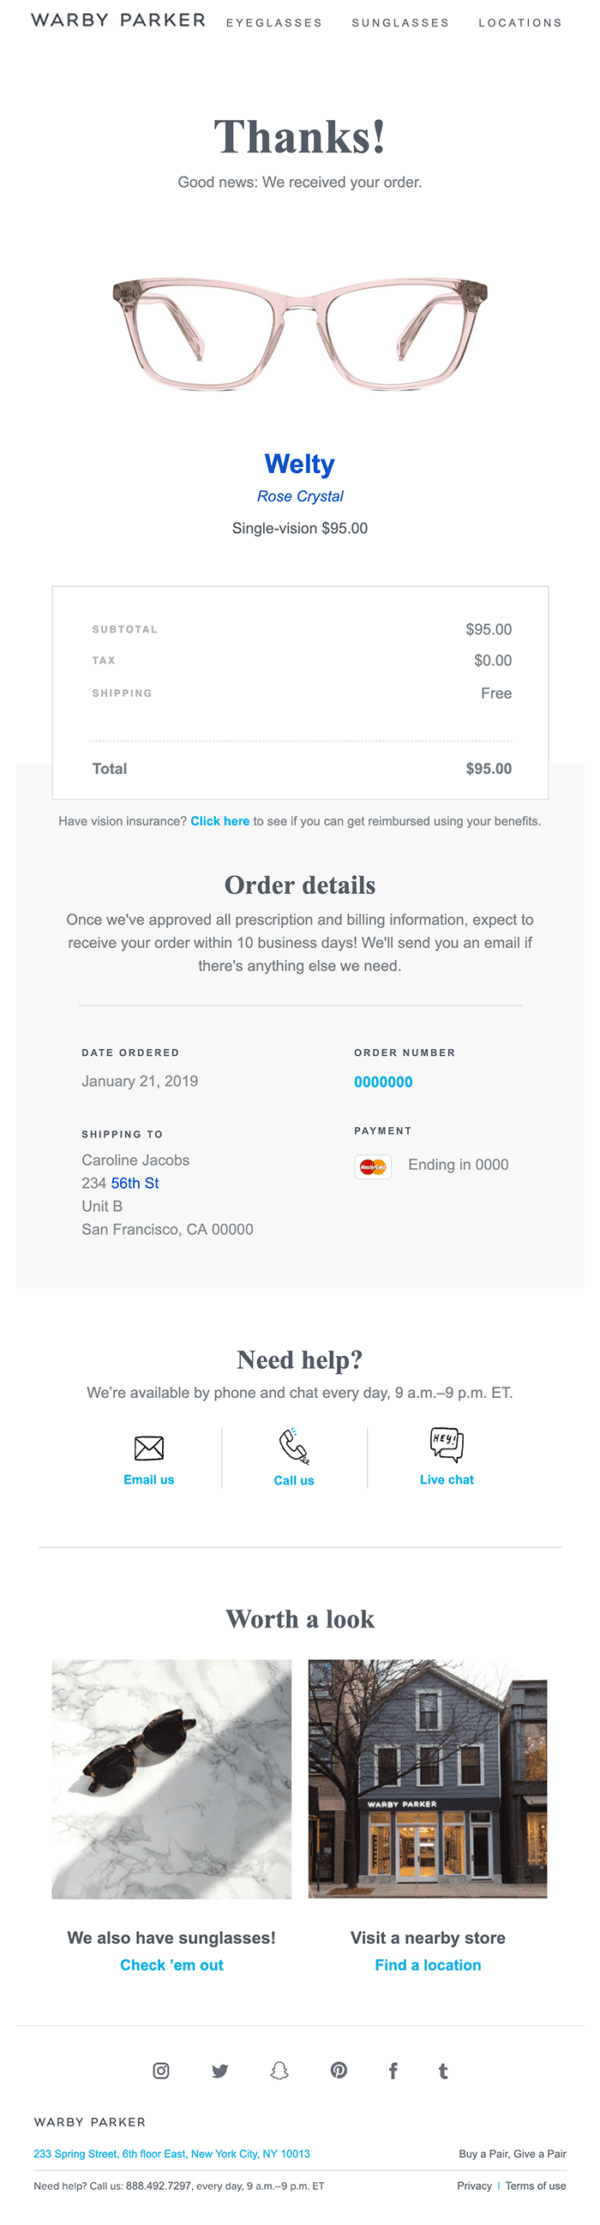 Warby parker email